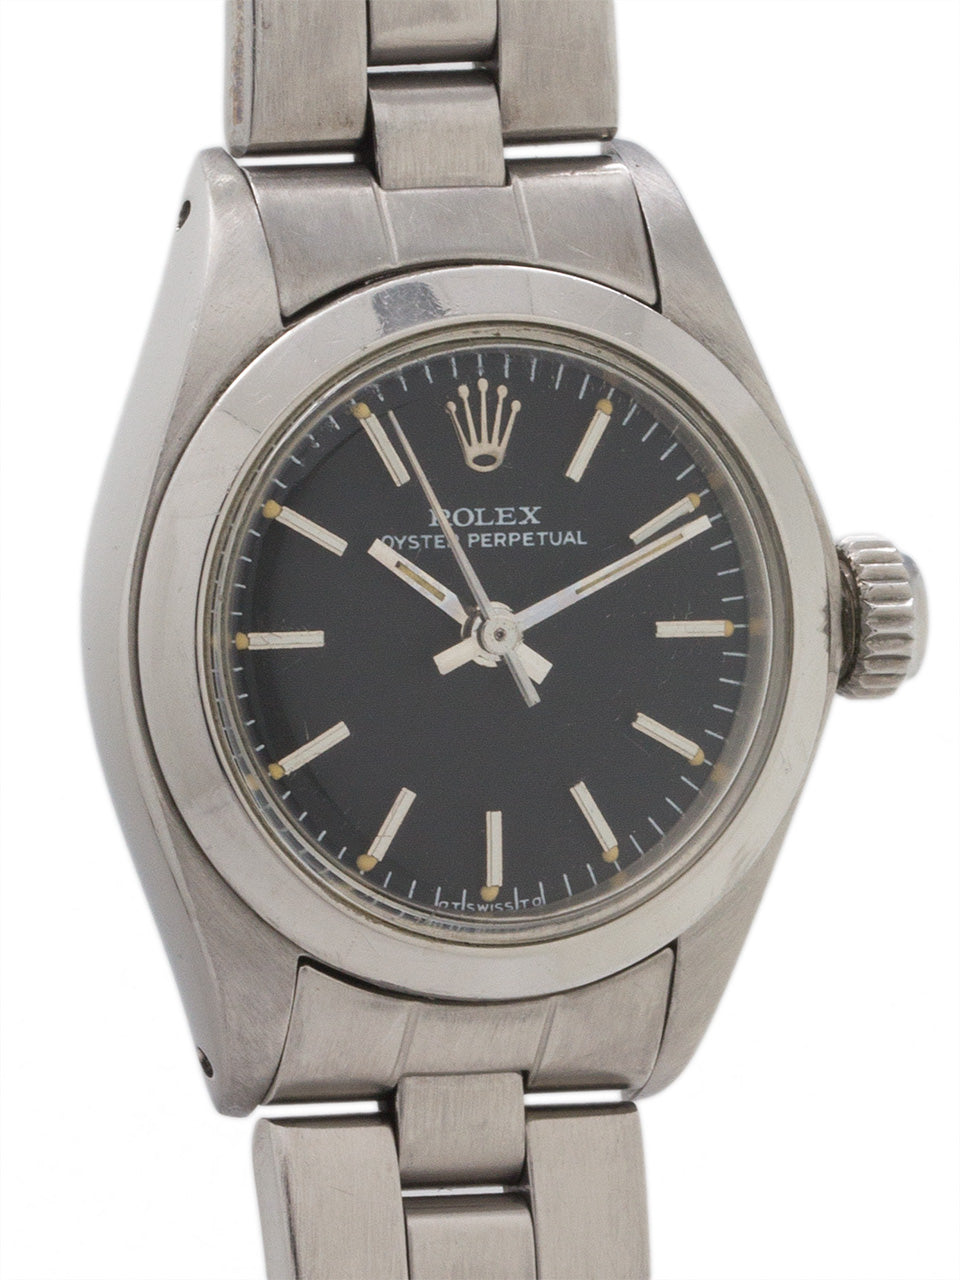 Rolex Oyster Perpetual 6718 3